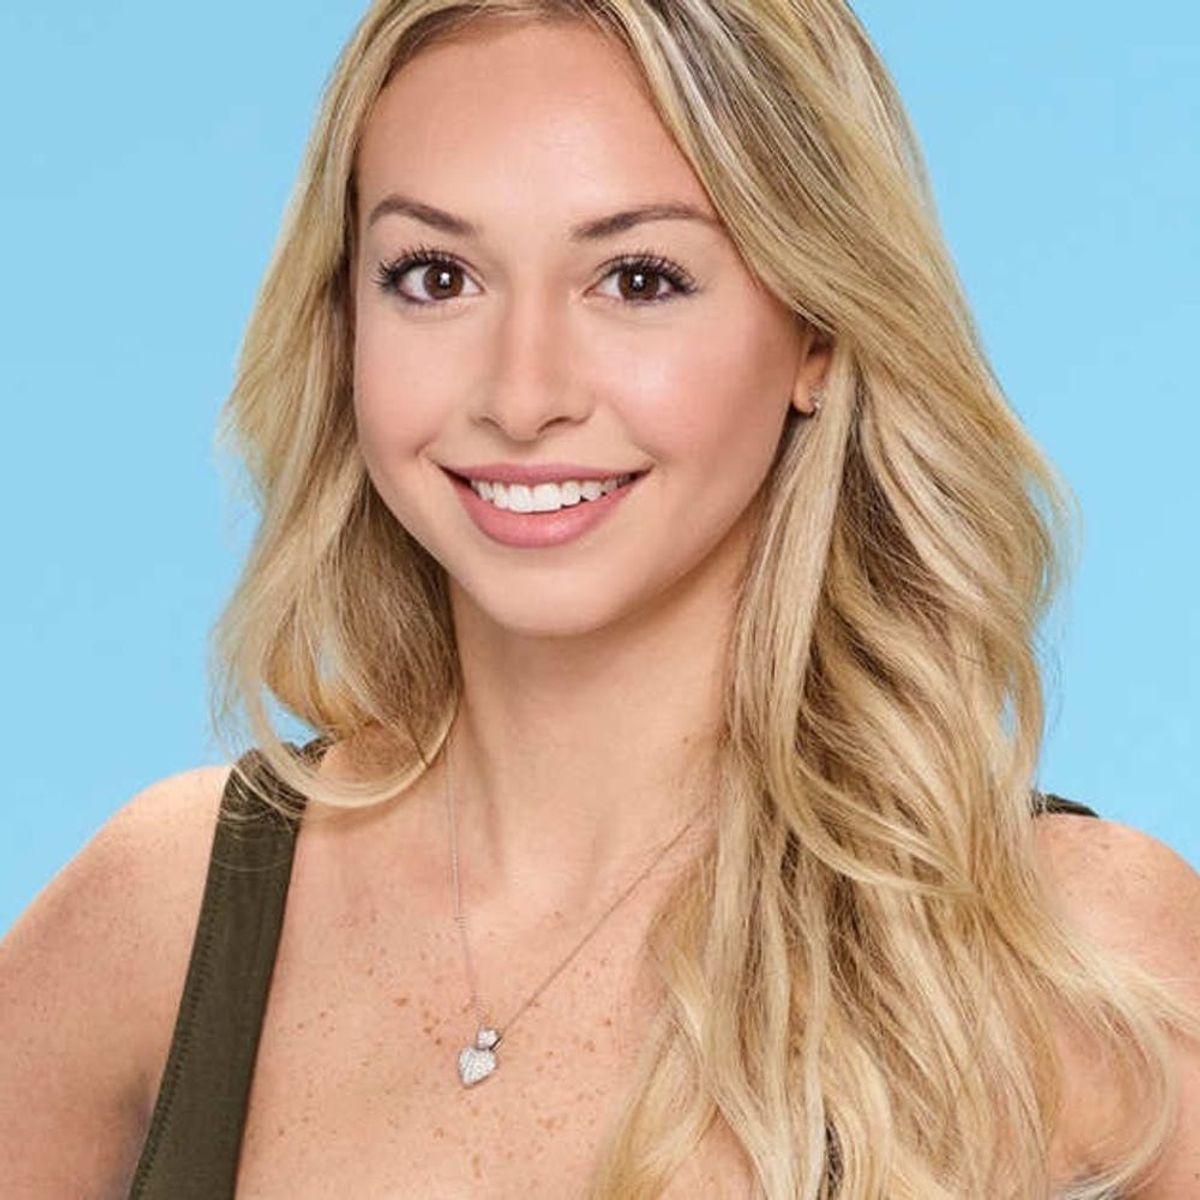 We Finally Know Why The Bachelor’s Corinne Had on an Engagement Ring